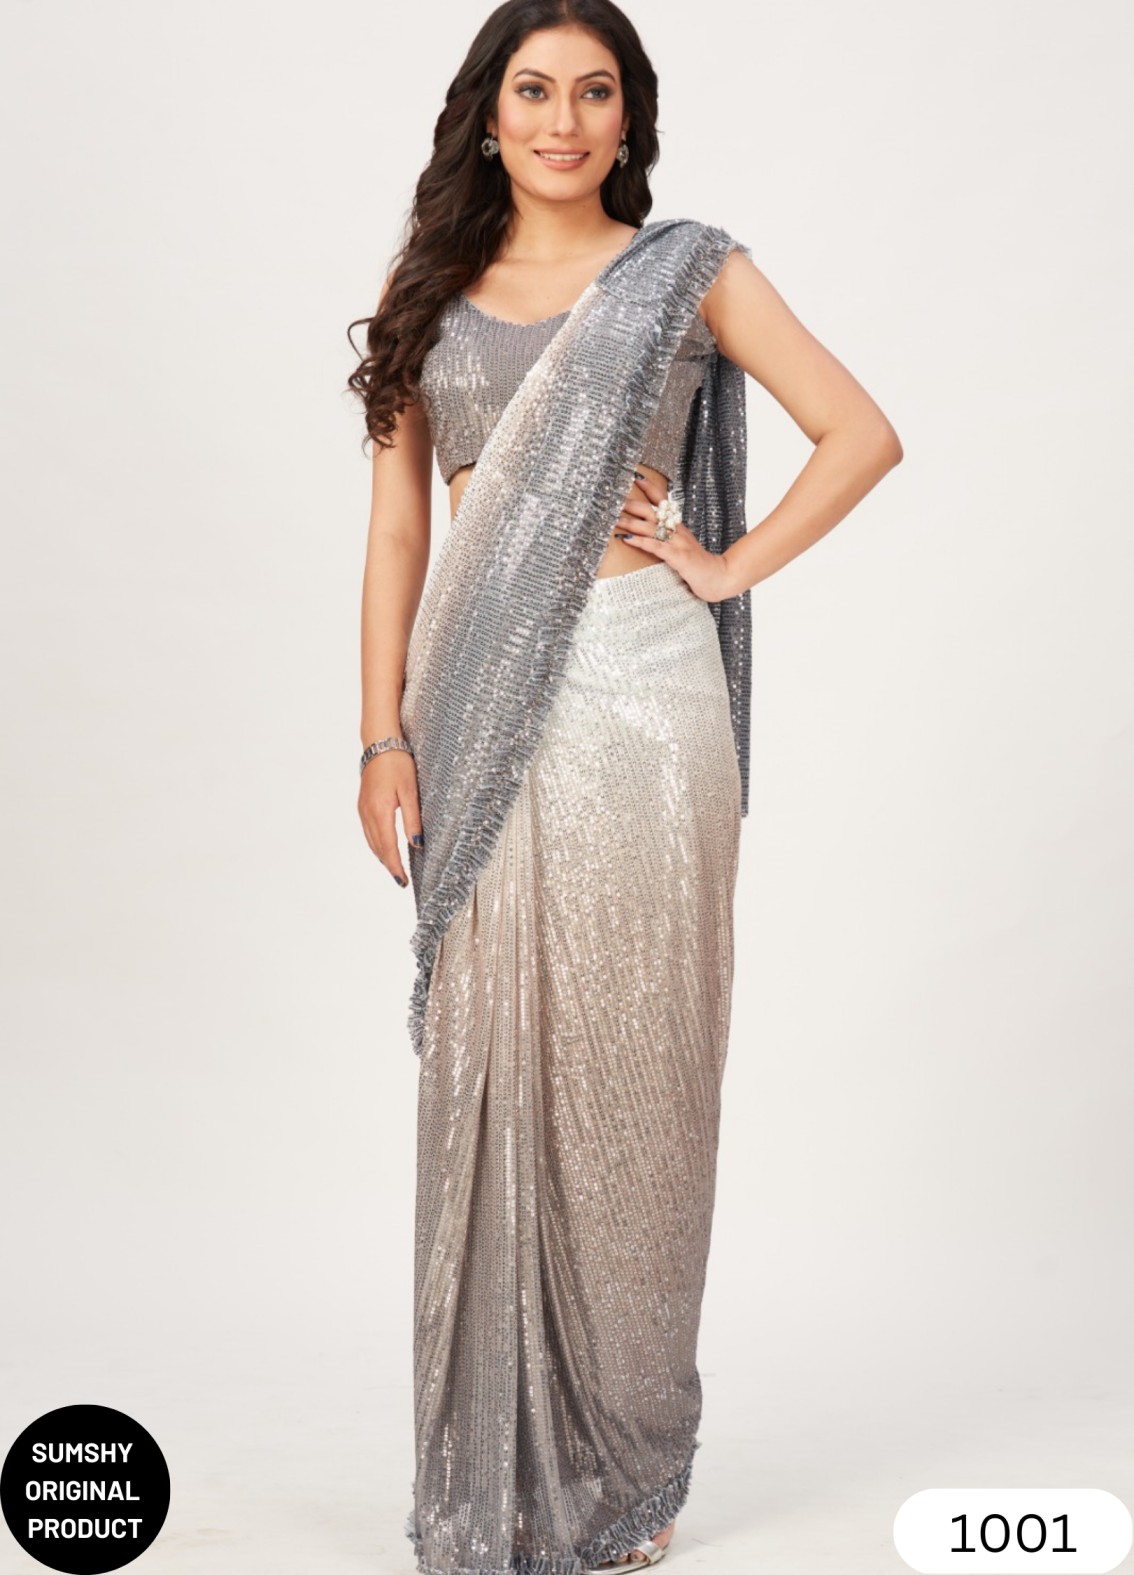 Saree draping style in different cultures/states in India - Stylecaret.com-nlmtdanang.com.vn